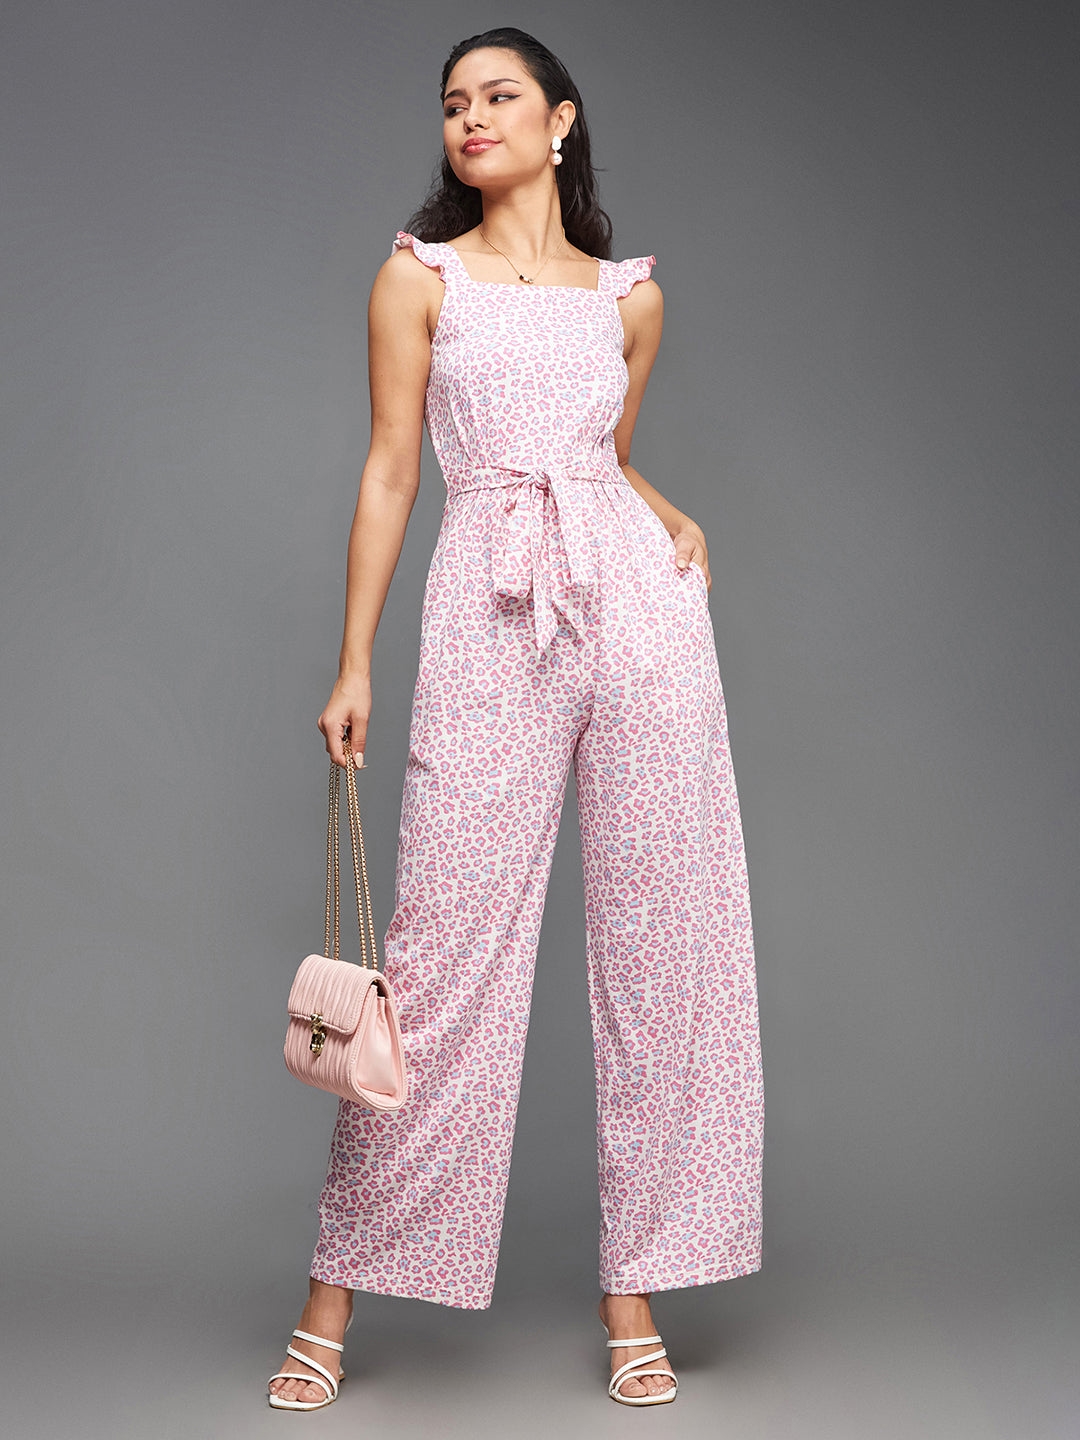 Multicolored-Base-Peach Square Neck Sleeveless Animal-Patterned Waist Tie-Up Pure Cotton Regular-Length Jumpsuit